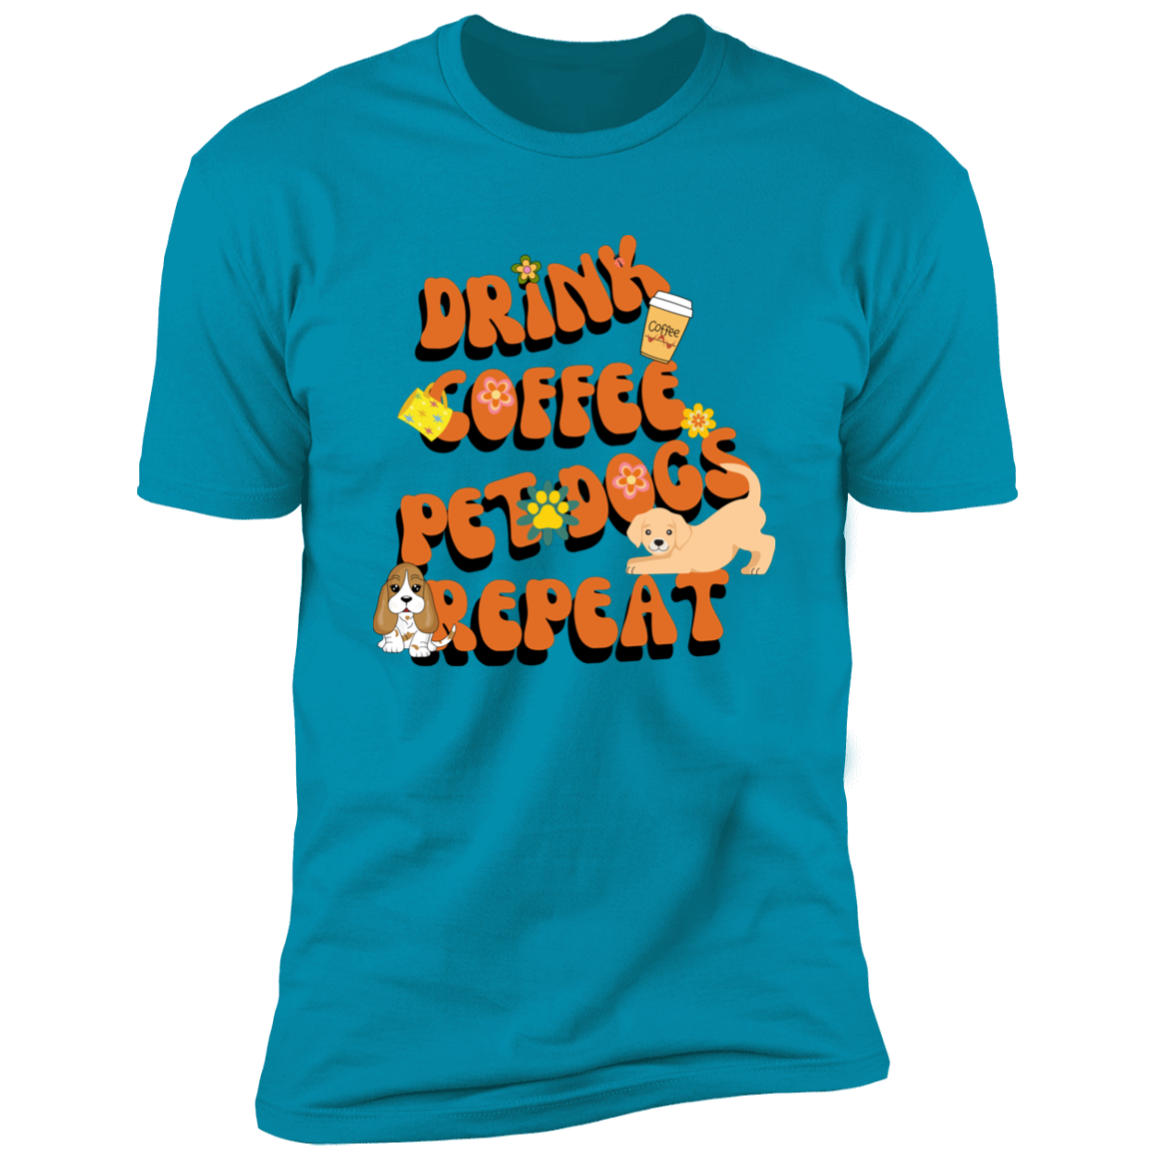 Drink Coffee Pet dogs repeat dog  Shirt, funny dog shirt for humans, dog mom and dog dad shirt, in turquoise